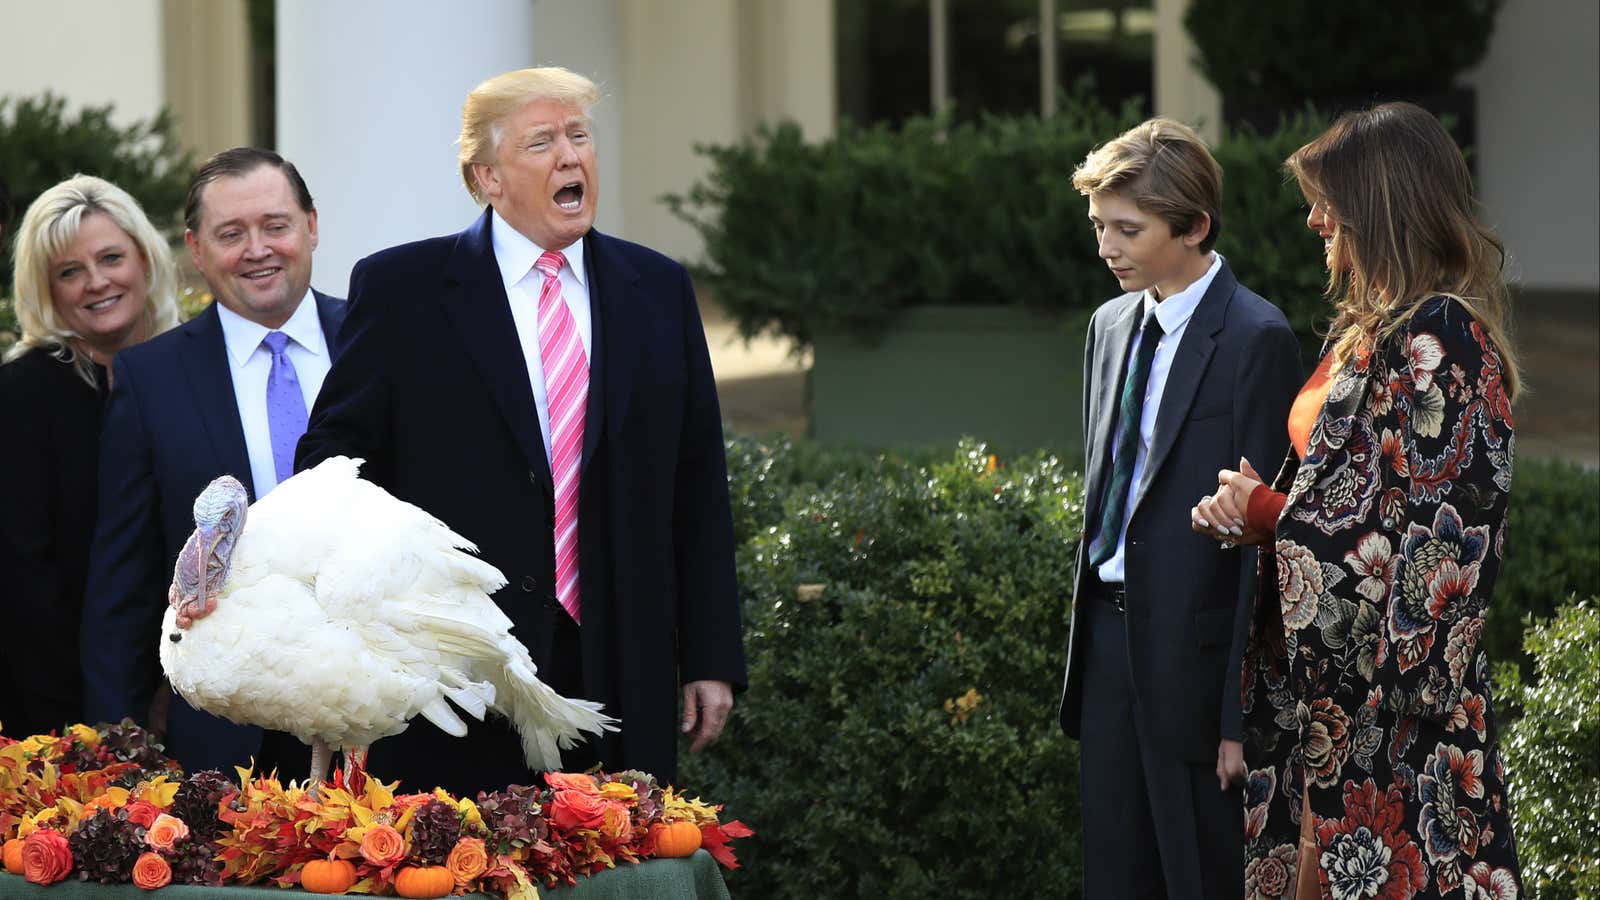 “Drumstick, you are hearby pardoned,” Trump said to the turkey chosen to be at the ceremony.